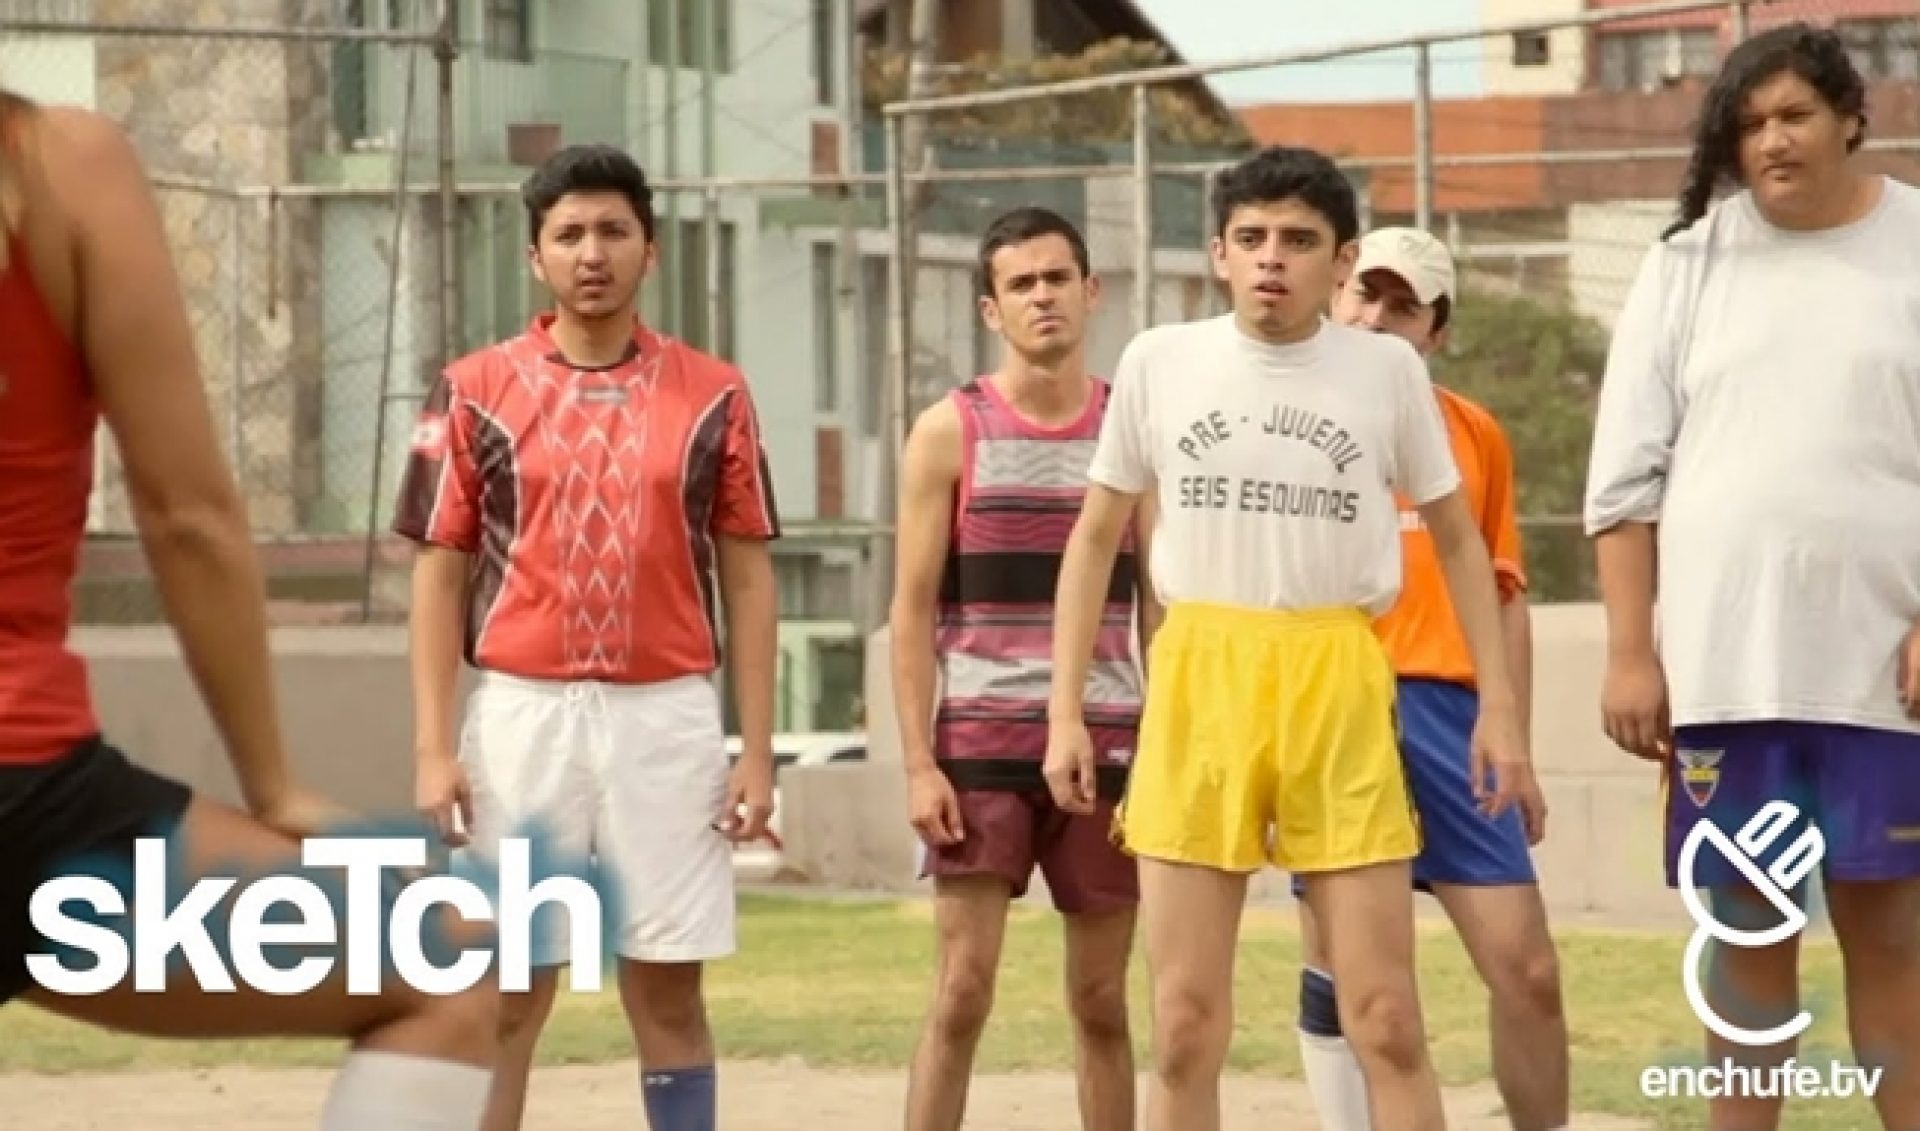 MiTu To Bring Top Spanish-Language Sketch Channel To English Speakers